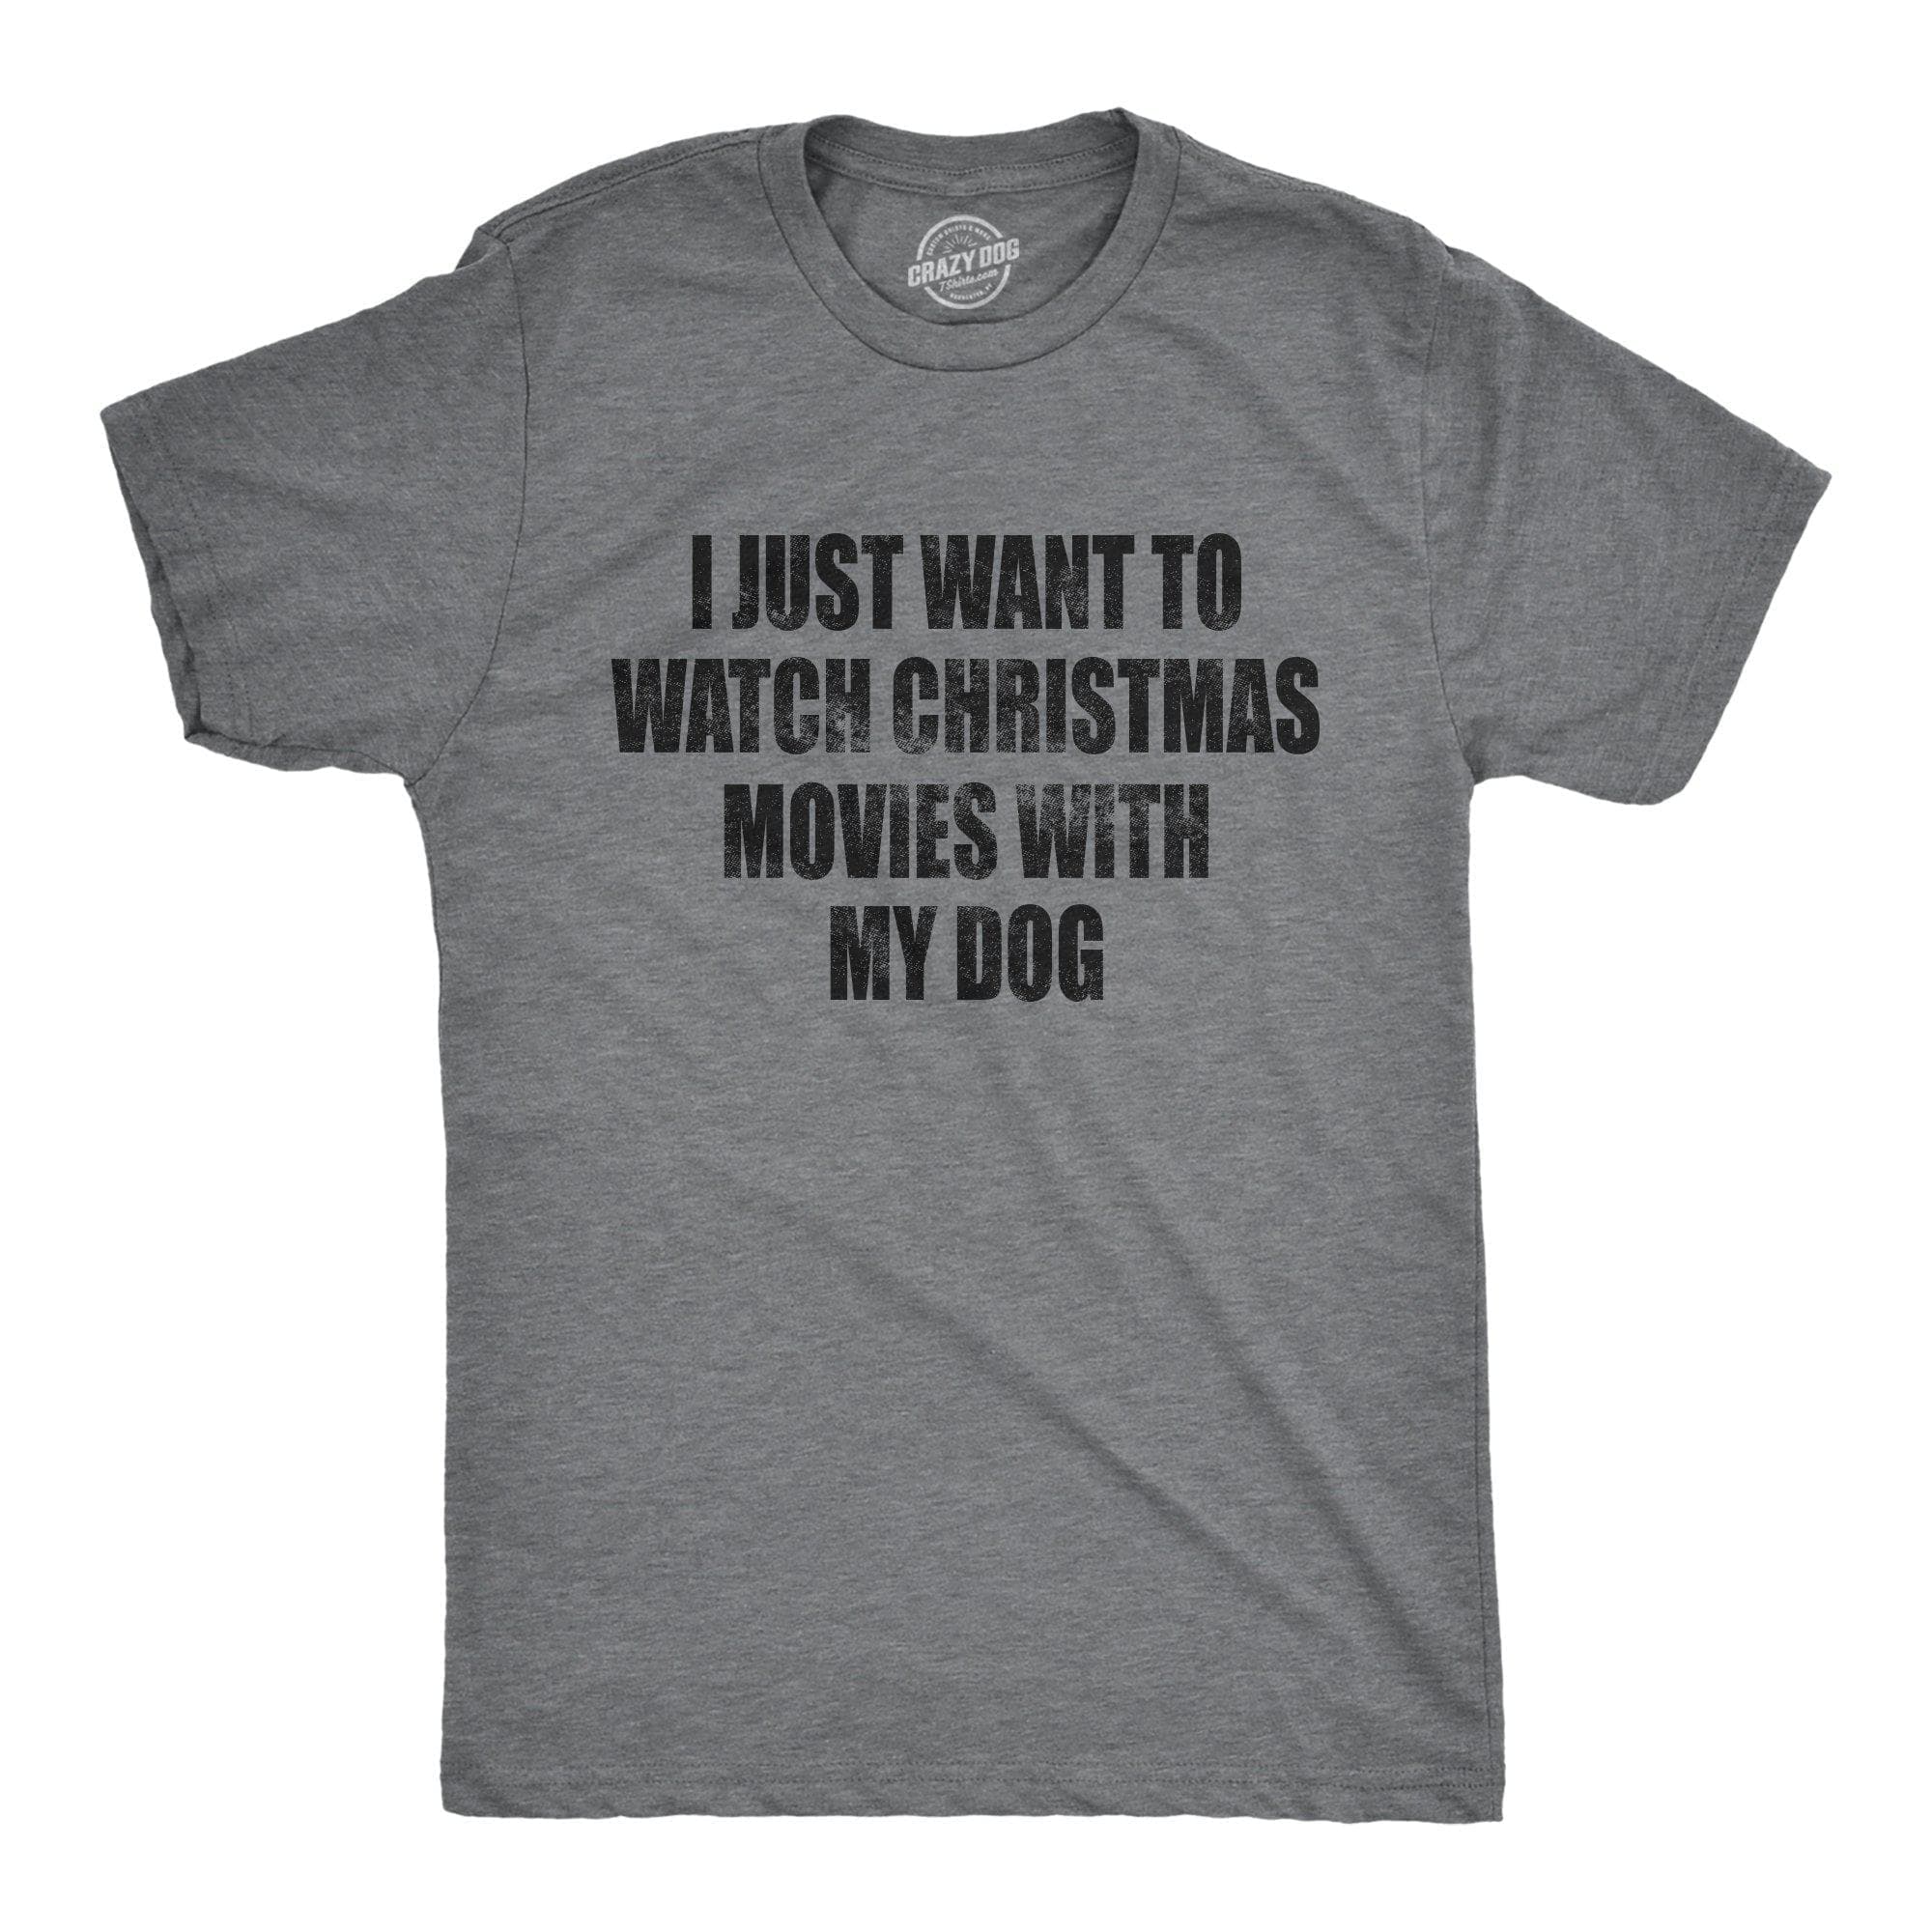 I Just Want To Watch Christmas Movies With My Dog Men's Tshirt - Crazy Dog T-Shirts